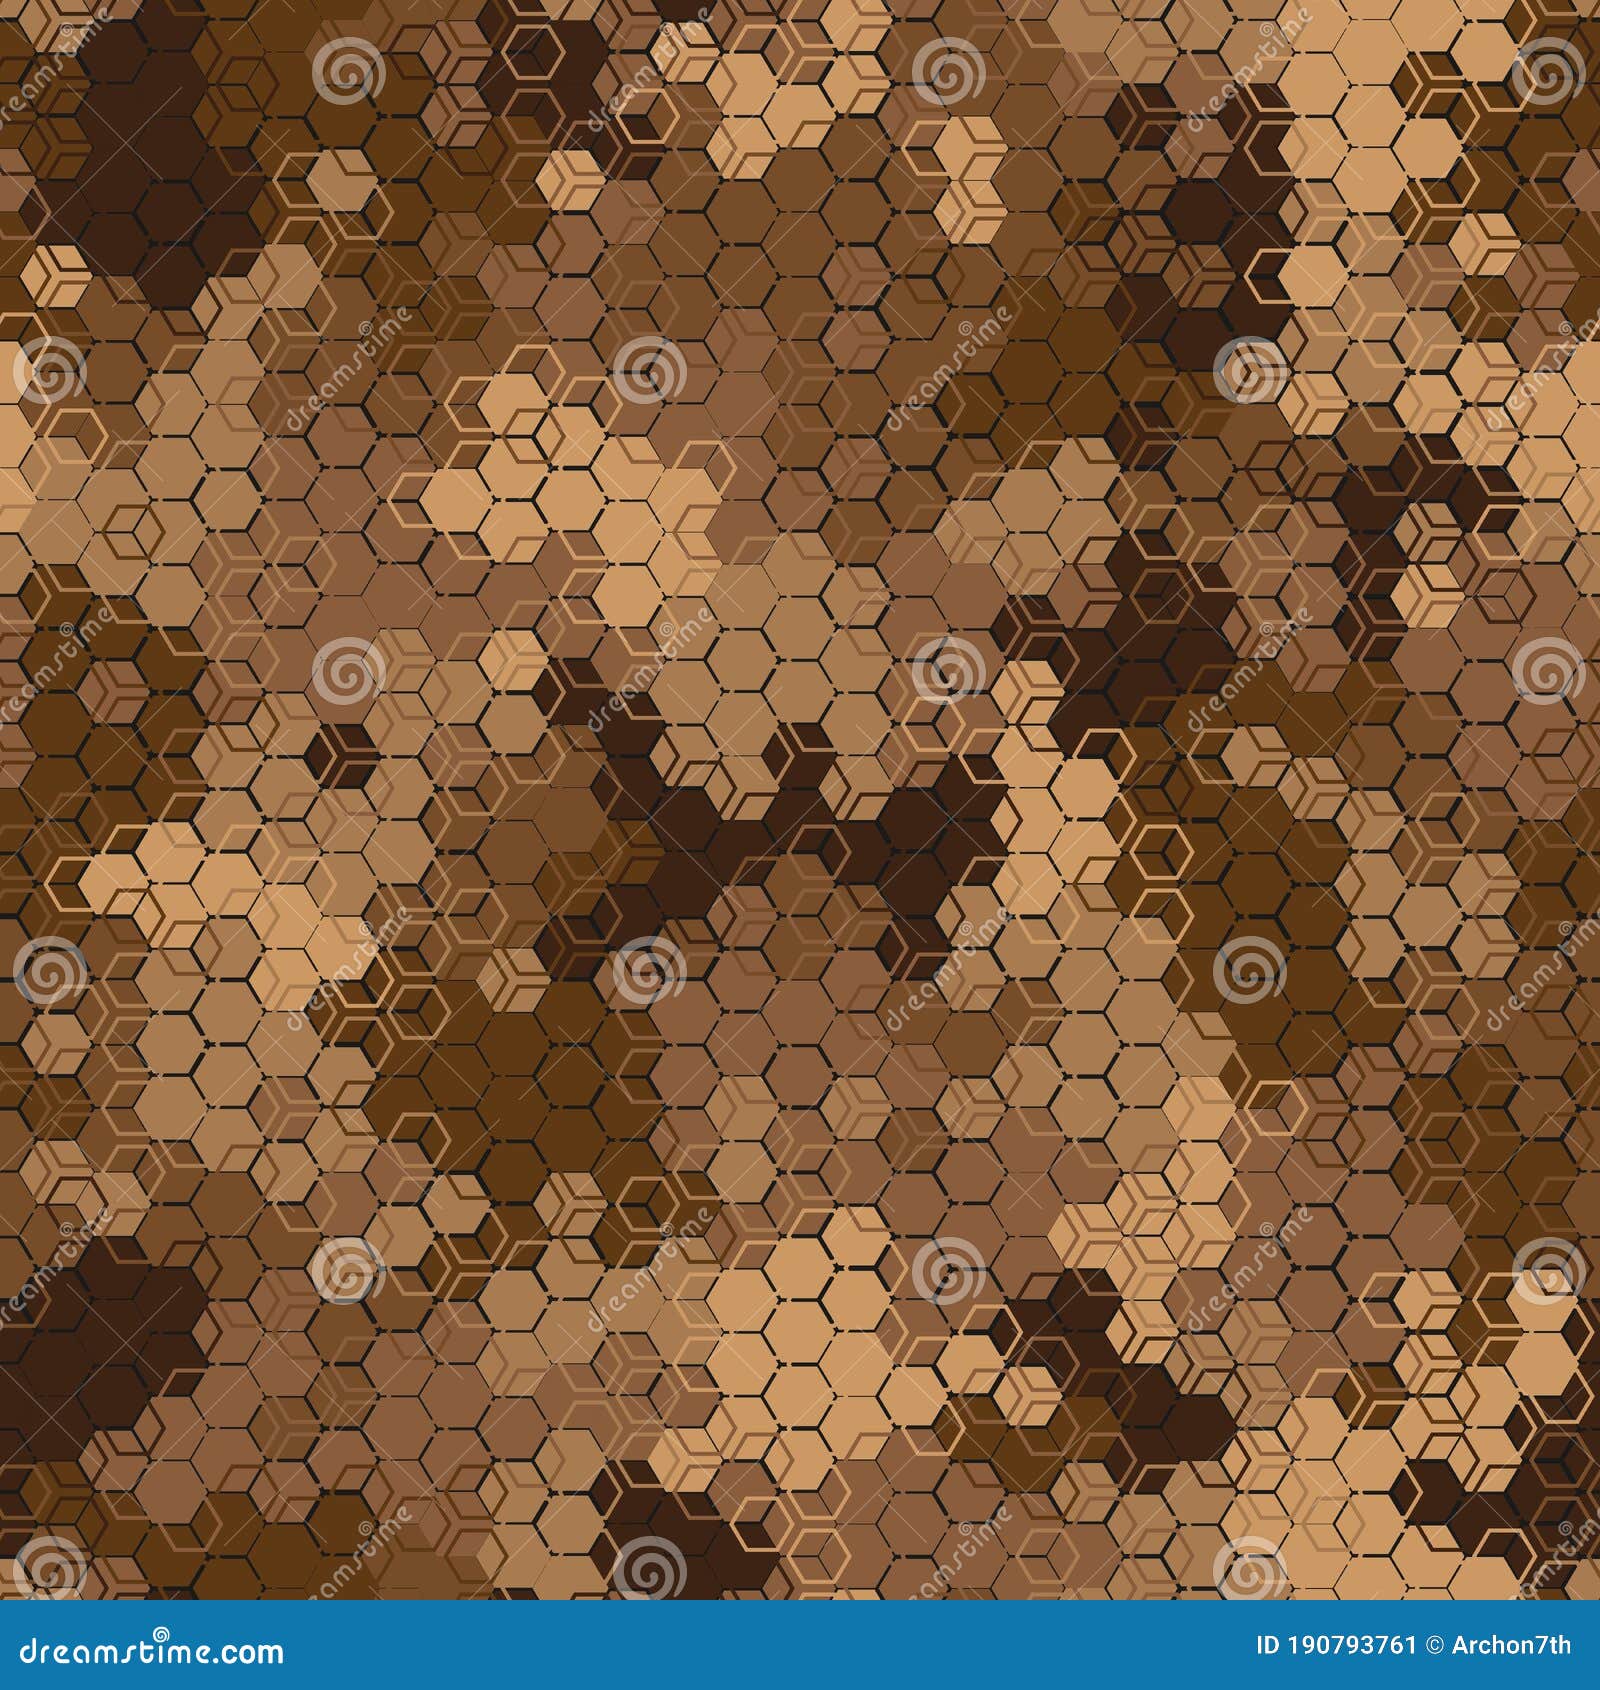 Texture Military Camouflage Seamless Pattern. Abstract Modern Camo ...